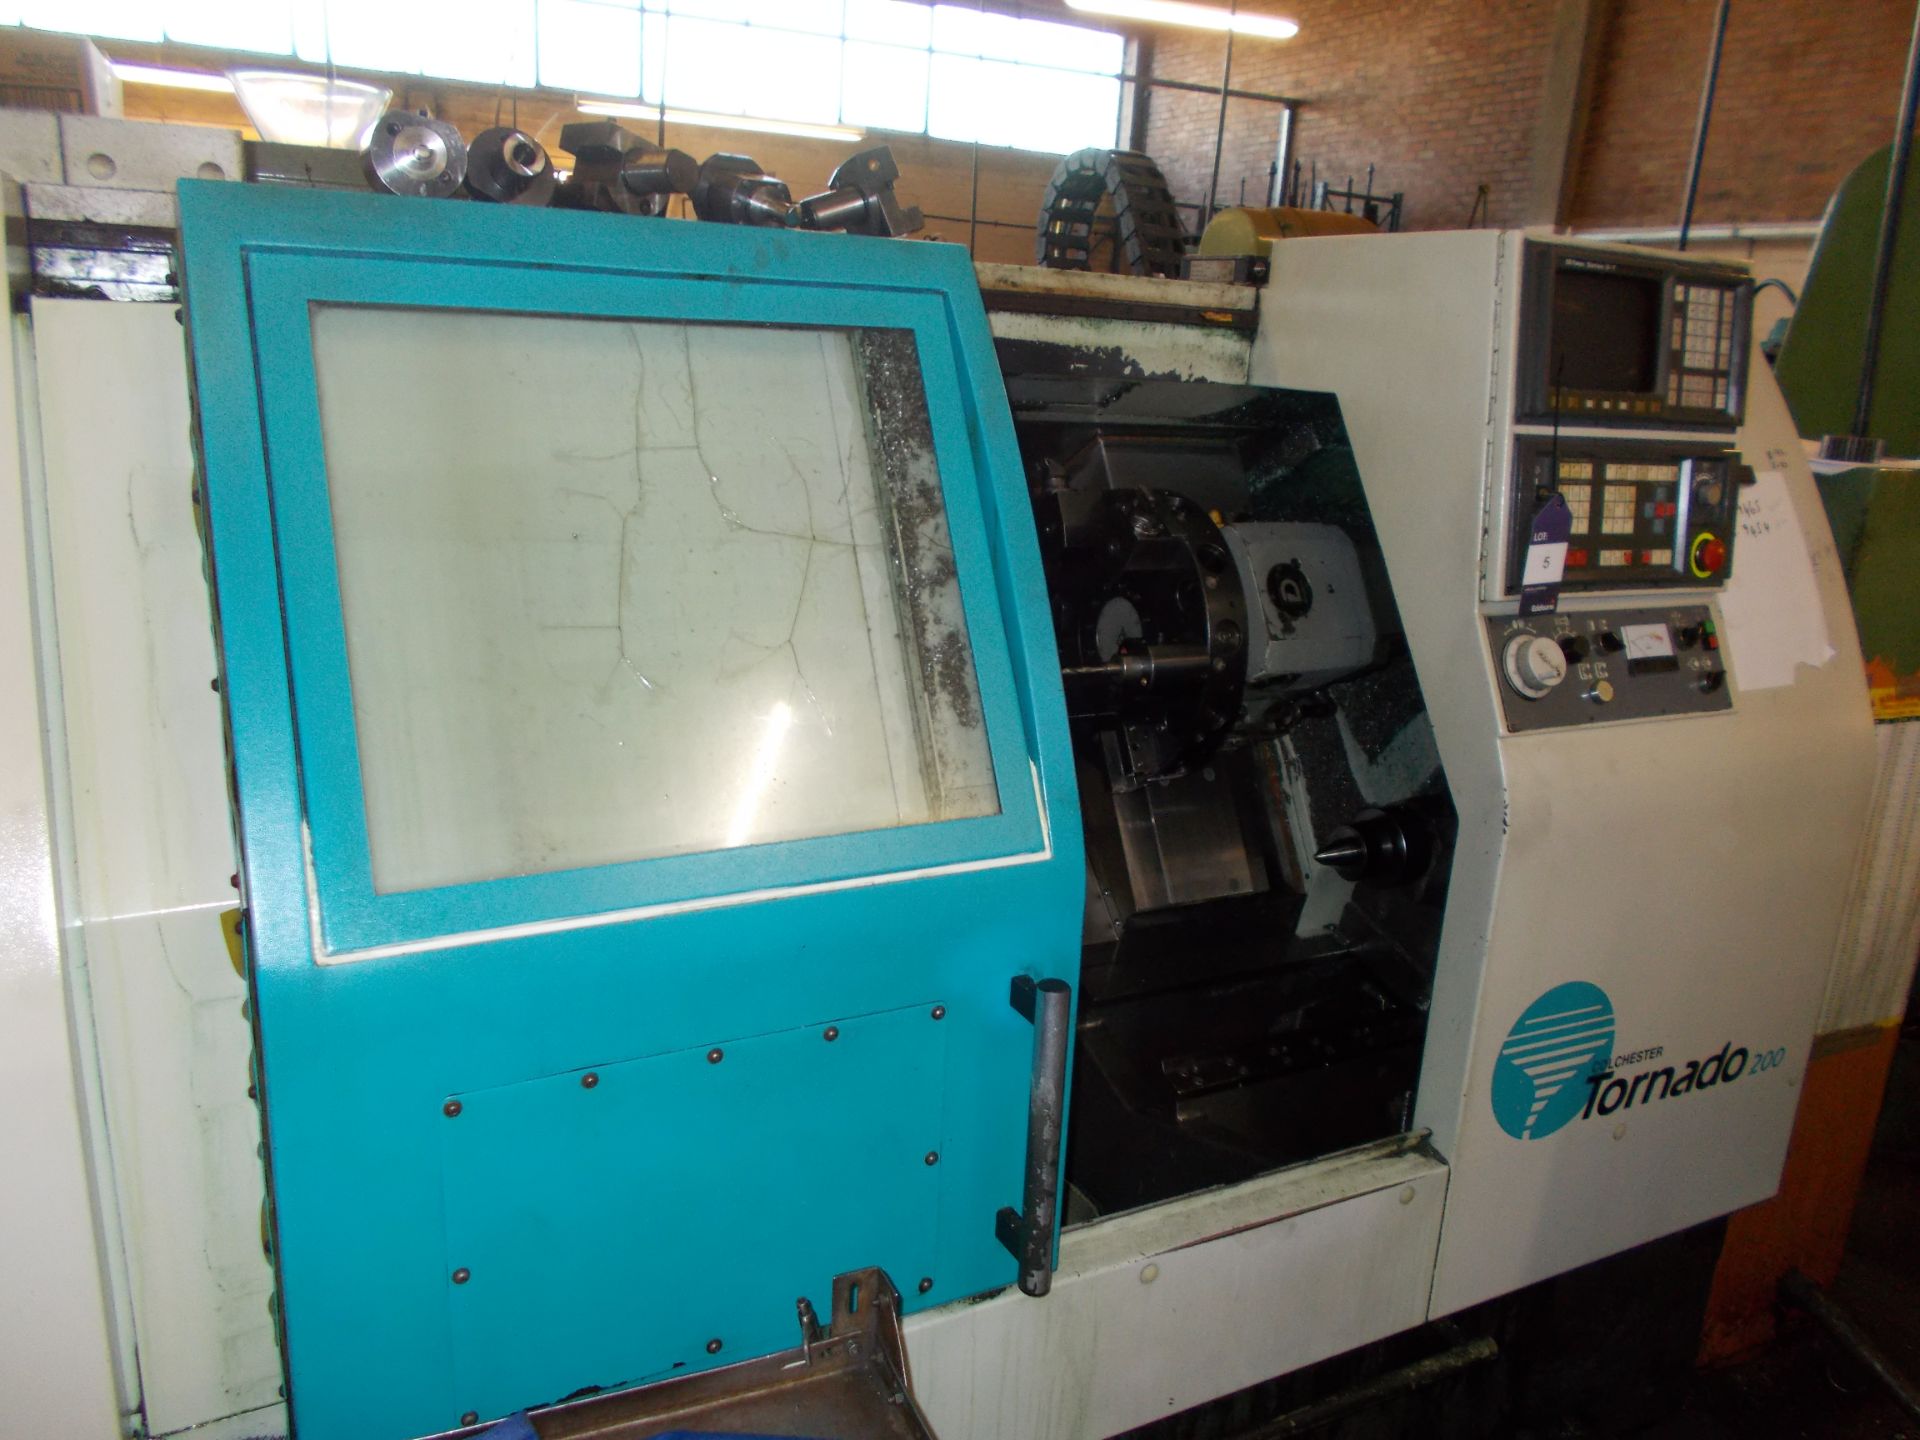 Colchester Tornado 200 CNC lathe (Serial Number: C20241, Year: 1995), with Fanuc Series OT control - Image 2 of 6